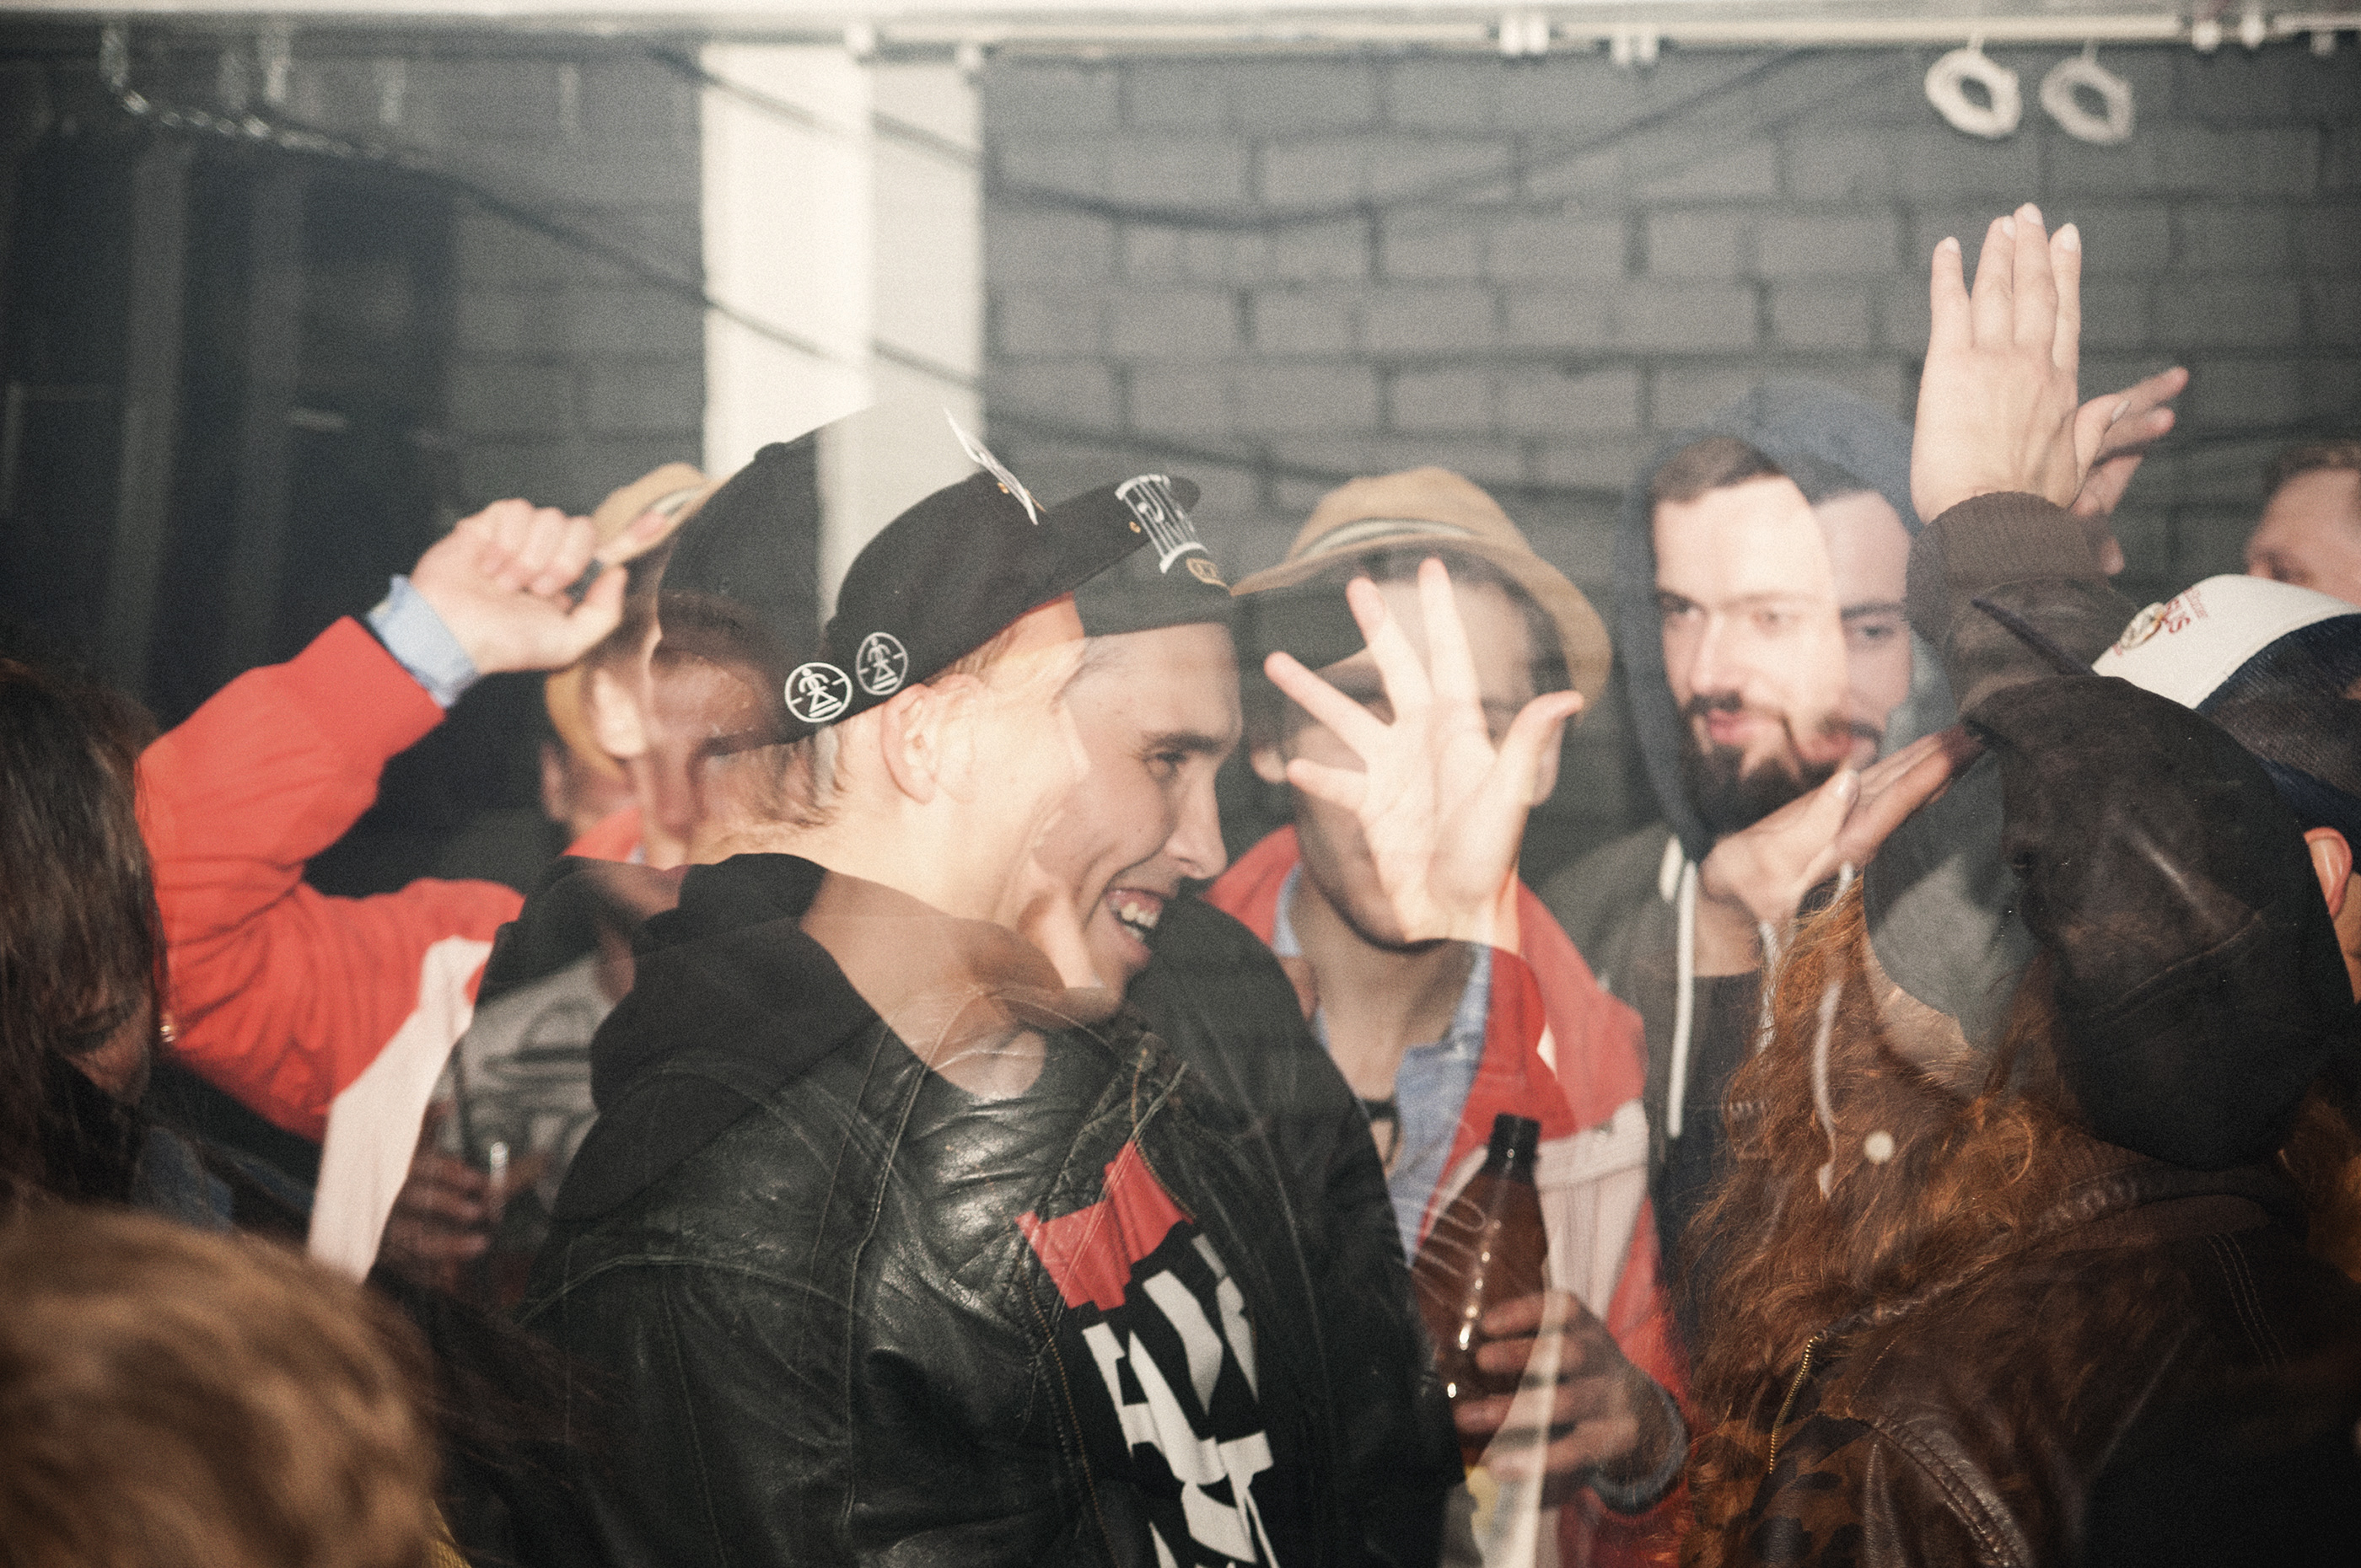 Party People on Behance